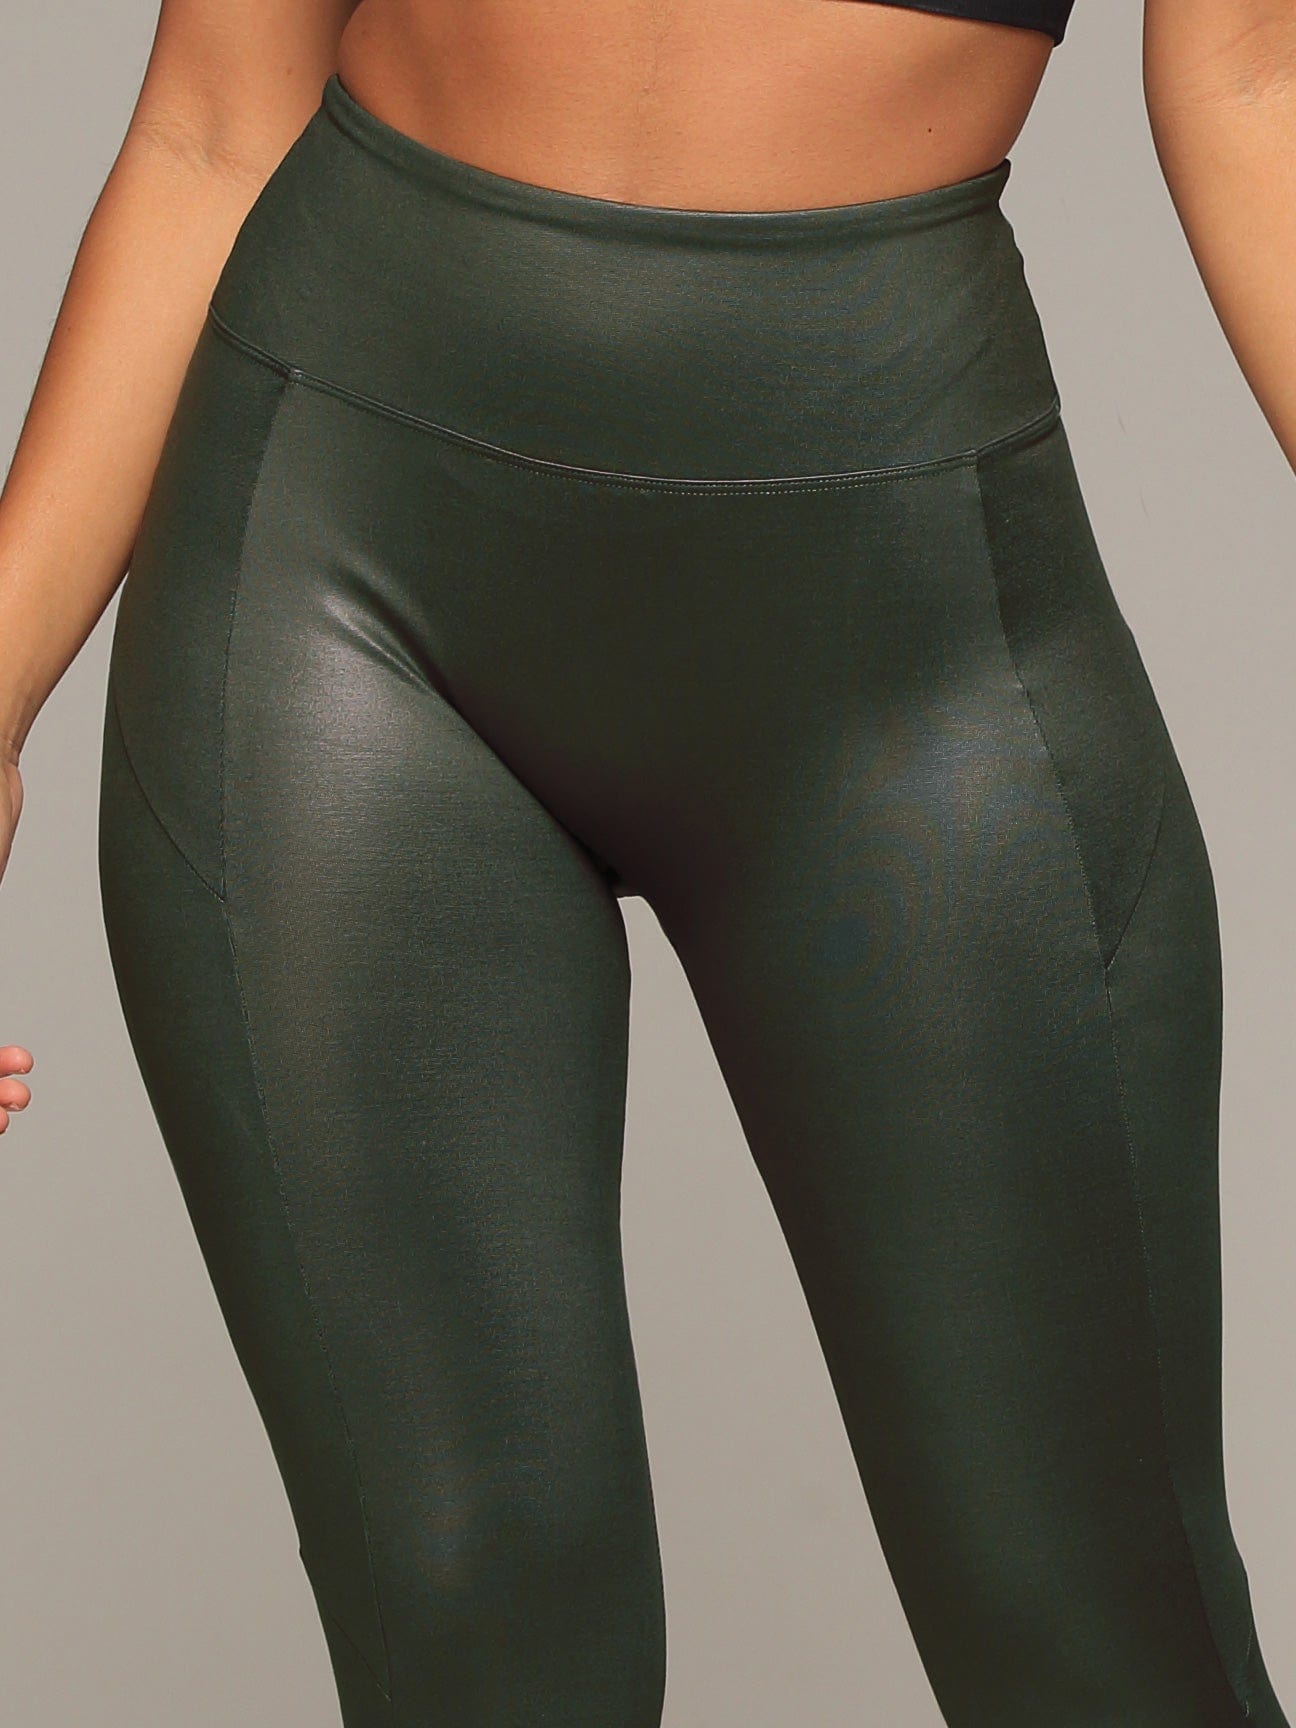 Forest Butt Lift Olive Leggings with Tummy Control front waist view.